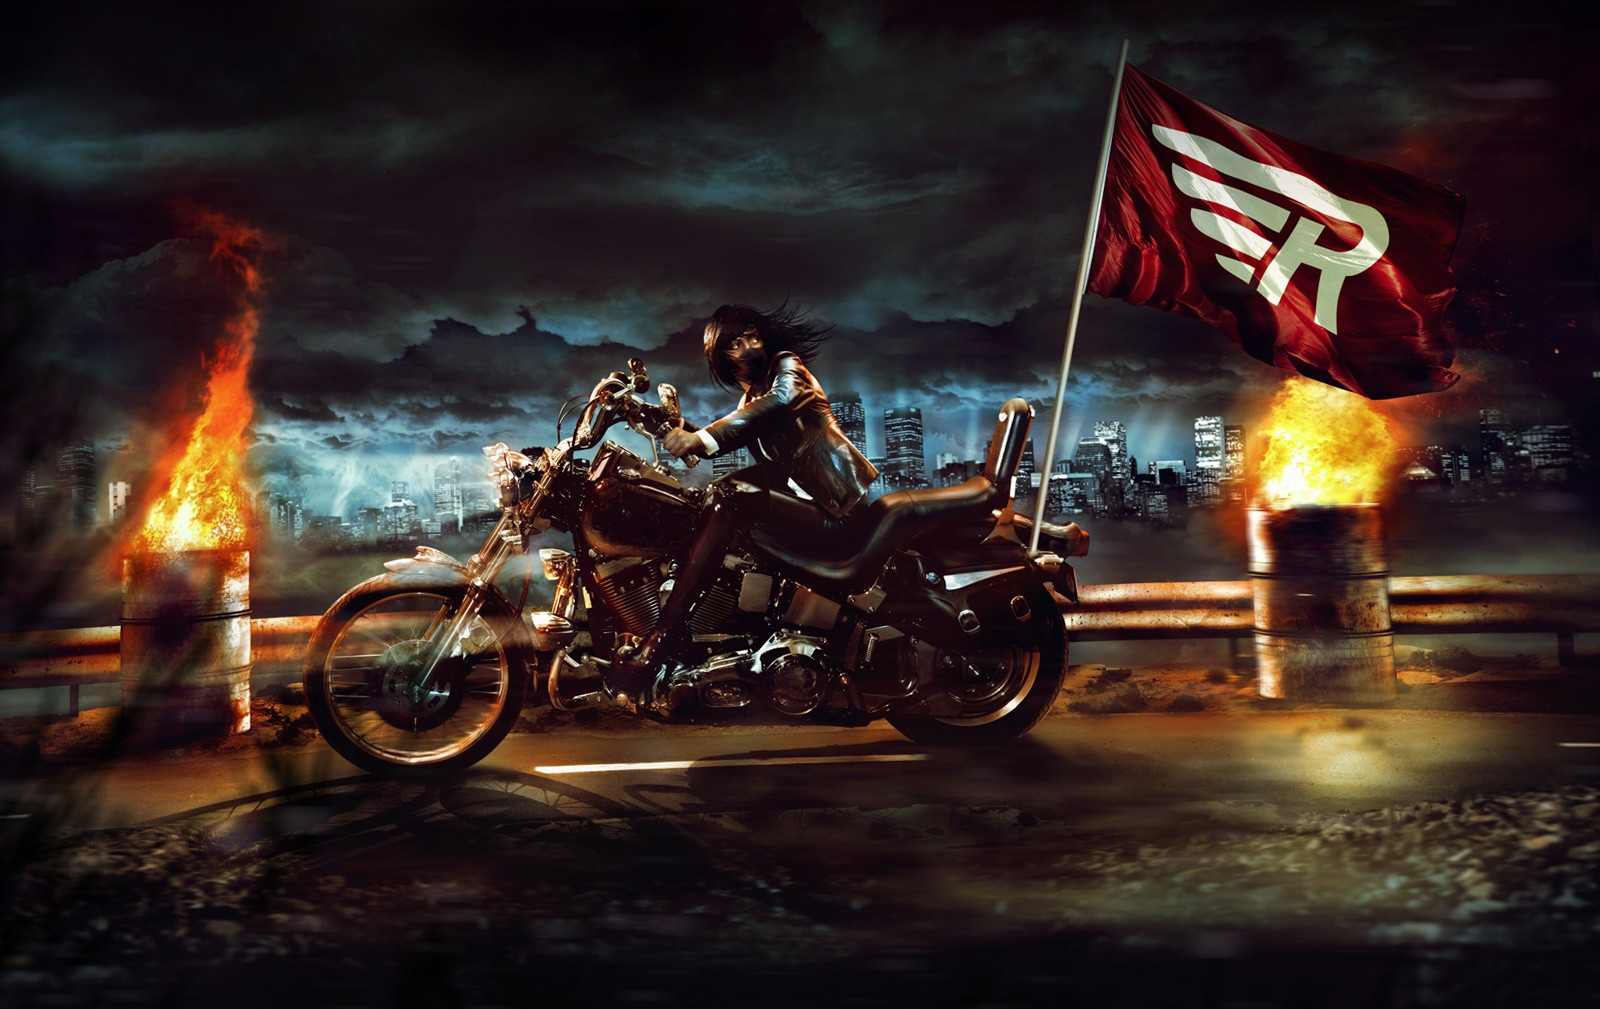 vehicles, Motorcycles, Motorbikes, Bikes, Cg, Digital, Art, Manipulation, Dark, Fire, Flames, Cities, Architecture, Skyline, Cityscape, Scapes, Roads, Flags, Symbols, Sky, Clouds, Moonlight, Light, Motion, Chase, Wallpaper